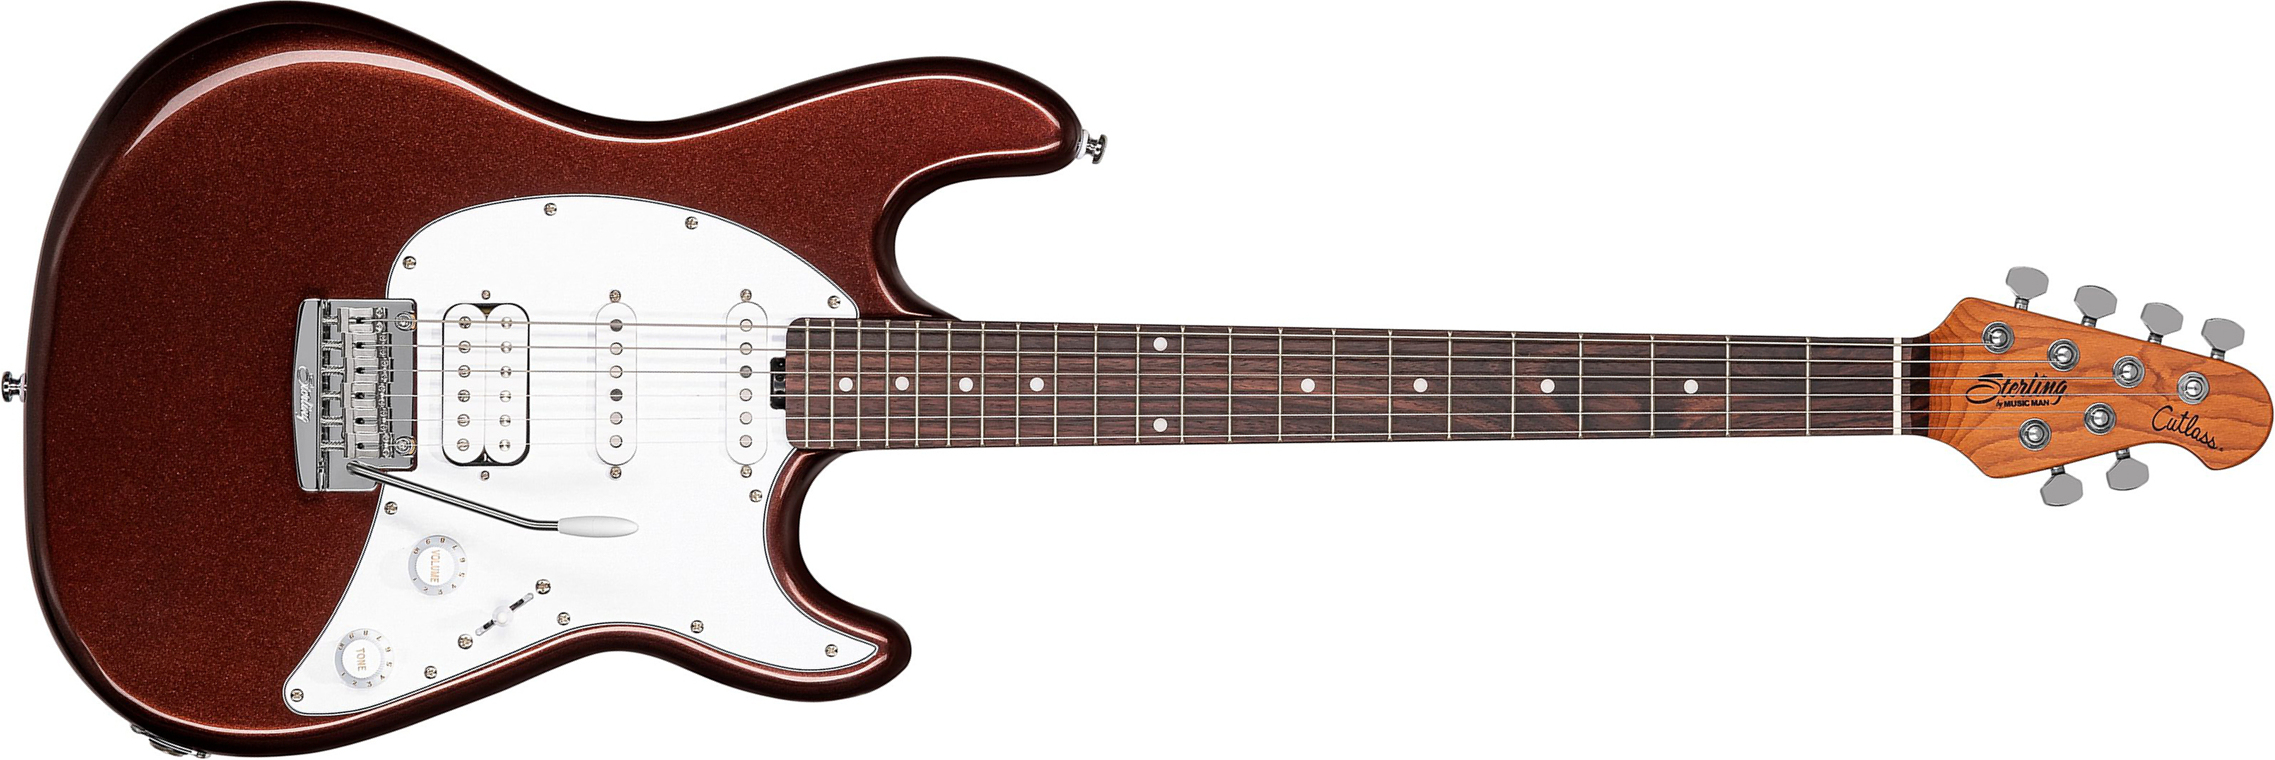 Sterling By Musicman Cutlass Ct50hss Trem Rw - Dropped Copper - Str shape electric guitar - Main picture